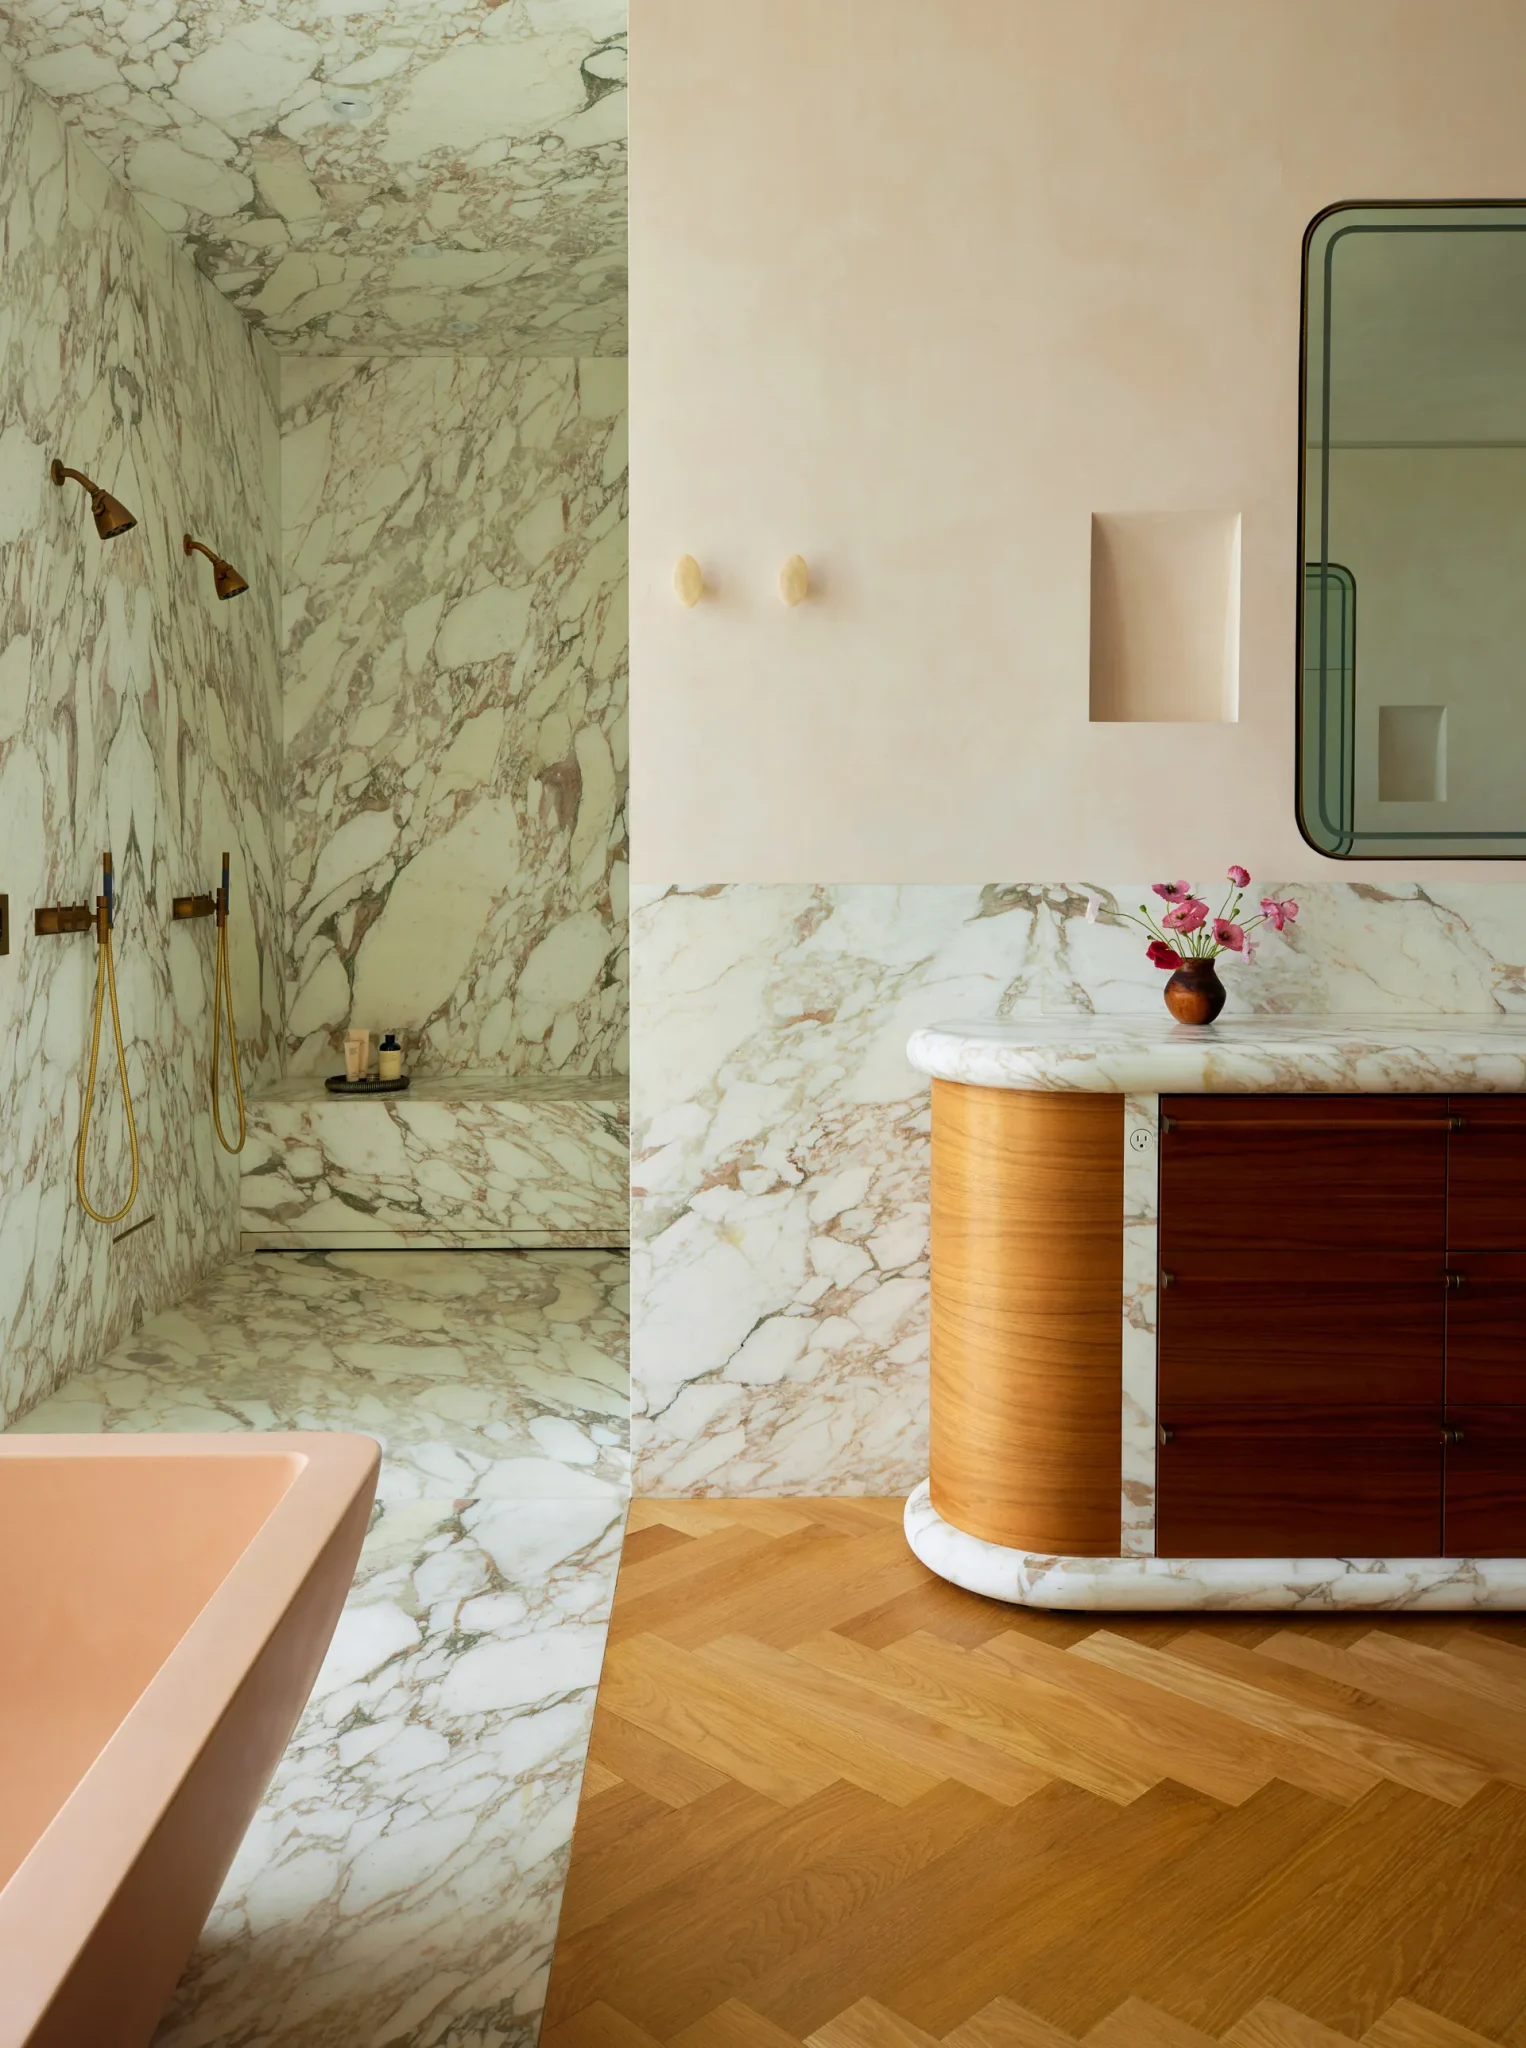 primary bathroom features a custom marble-and-walnut vanity, broad expanses of calacatta monet marble